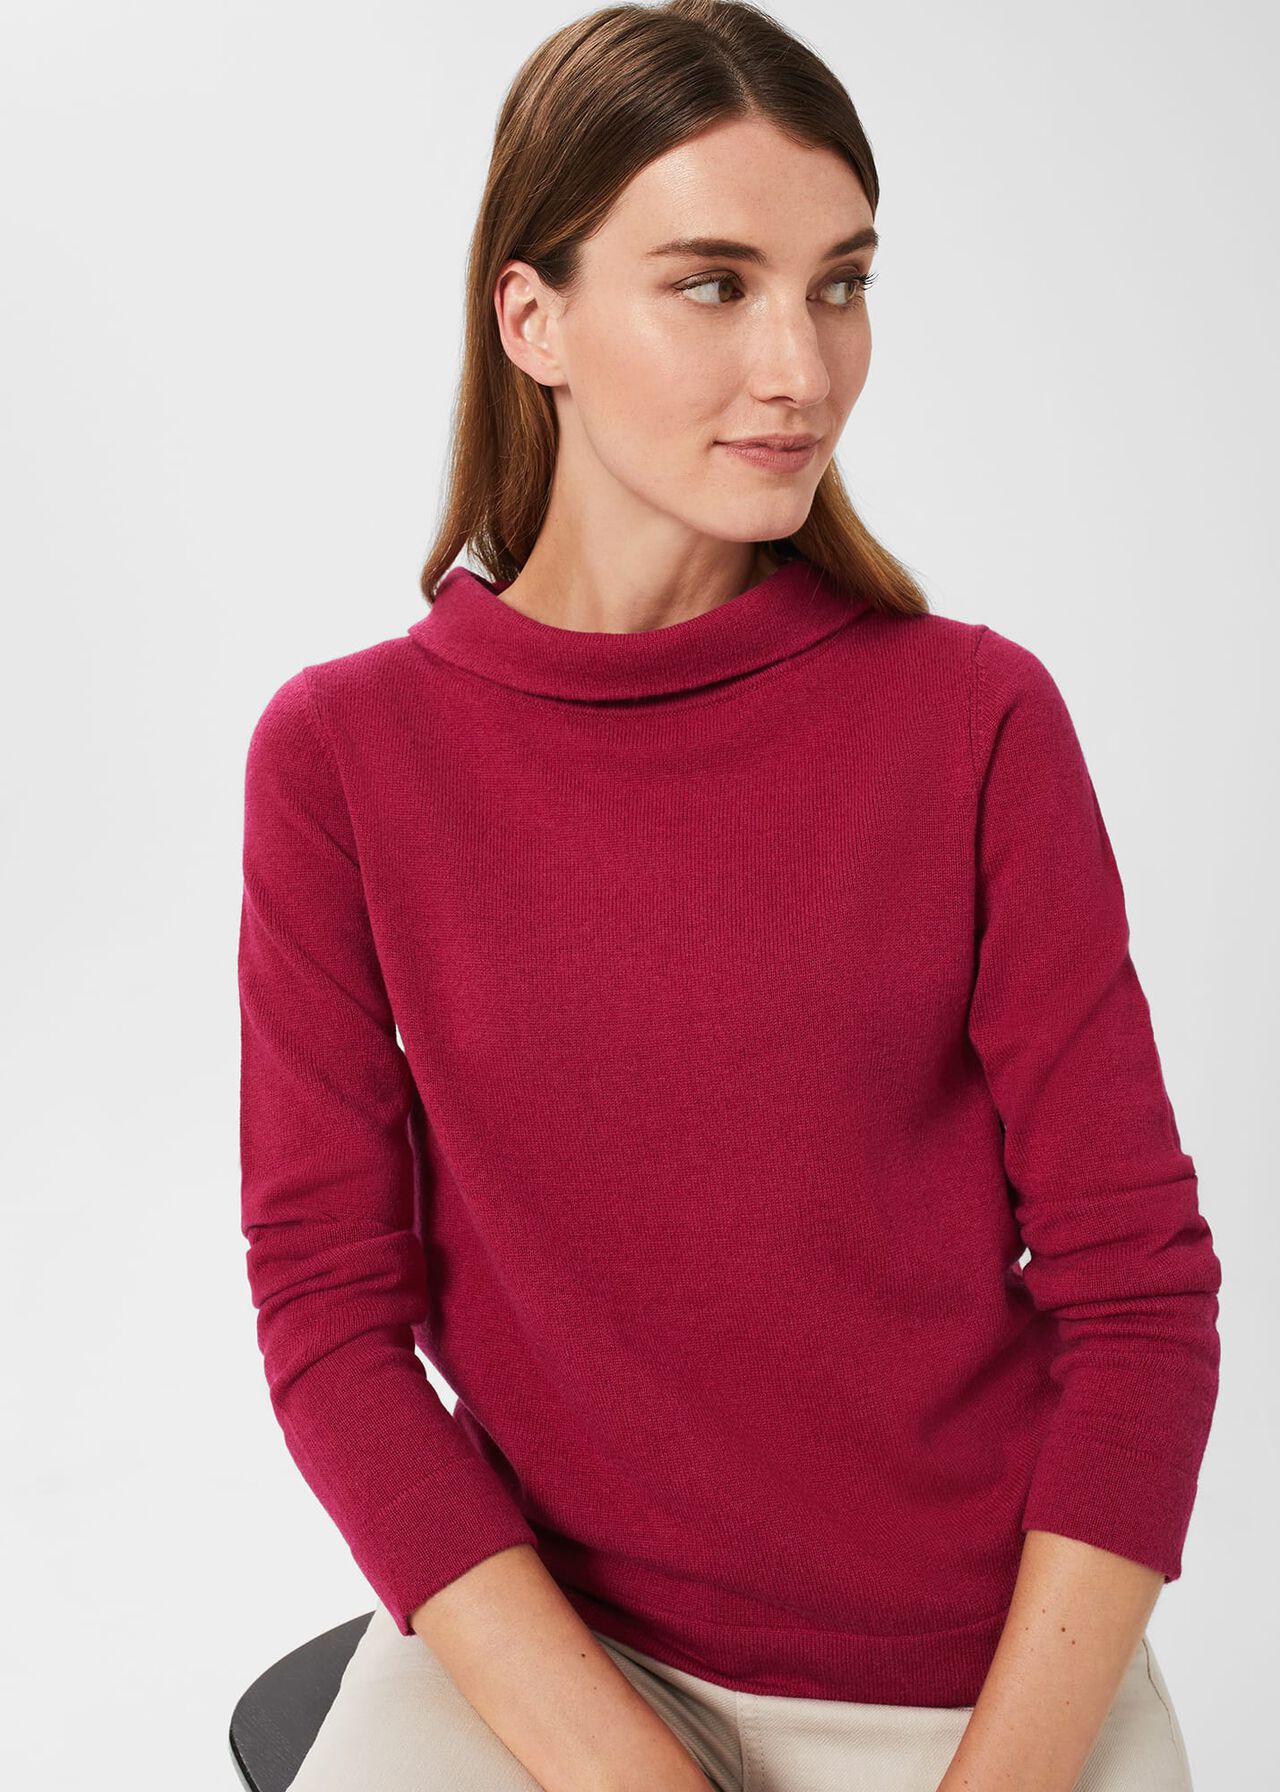 Audrey Wool Cashmere Sweater, Rich Berry Red, hi-res